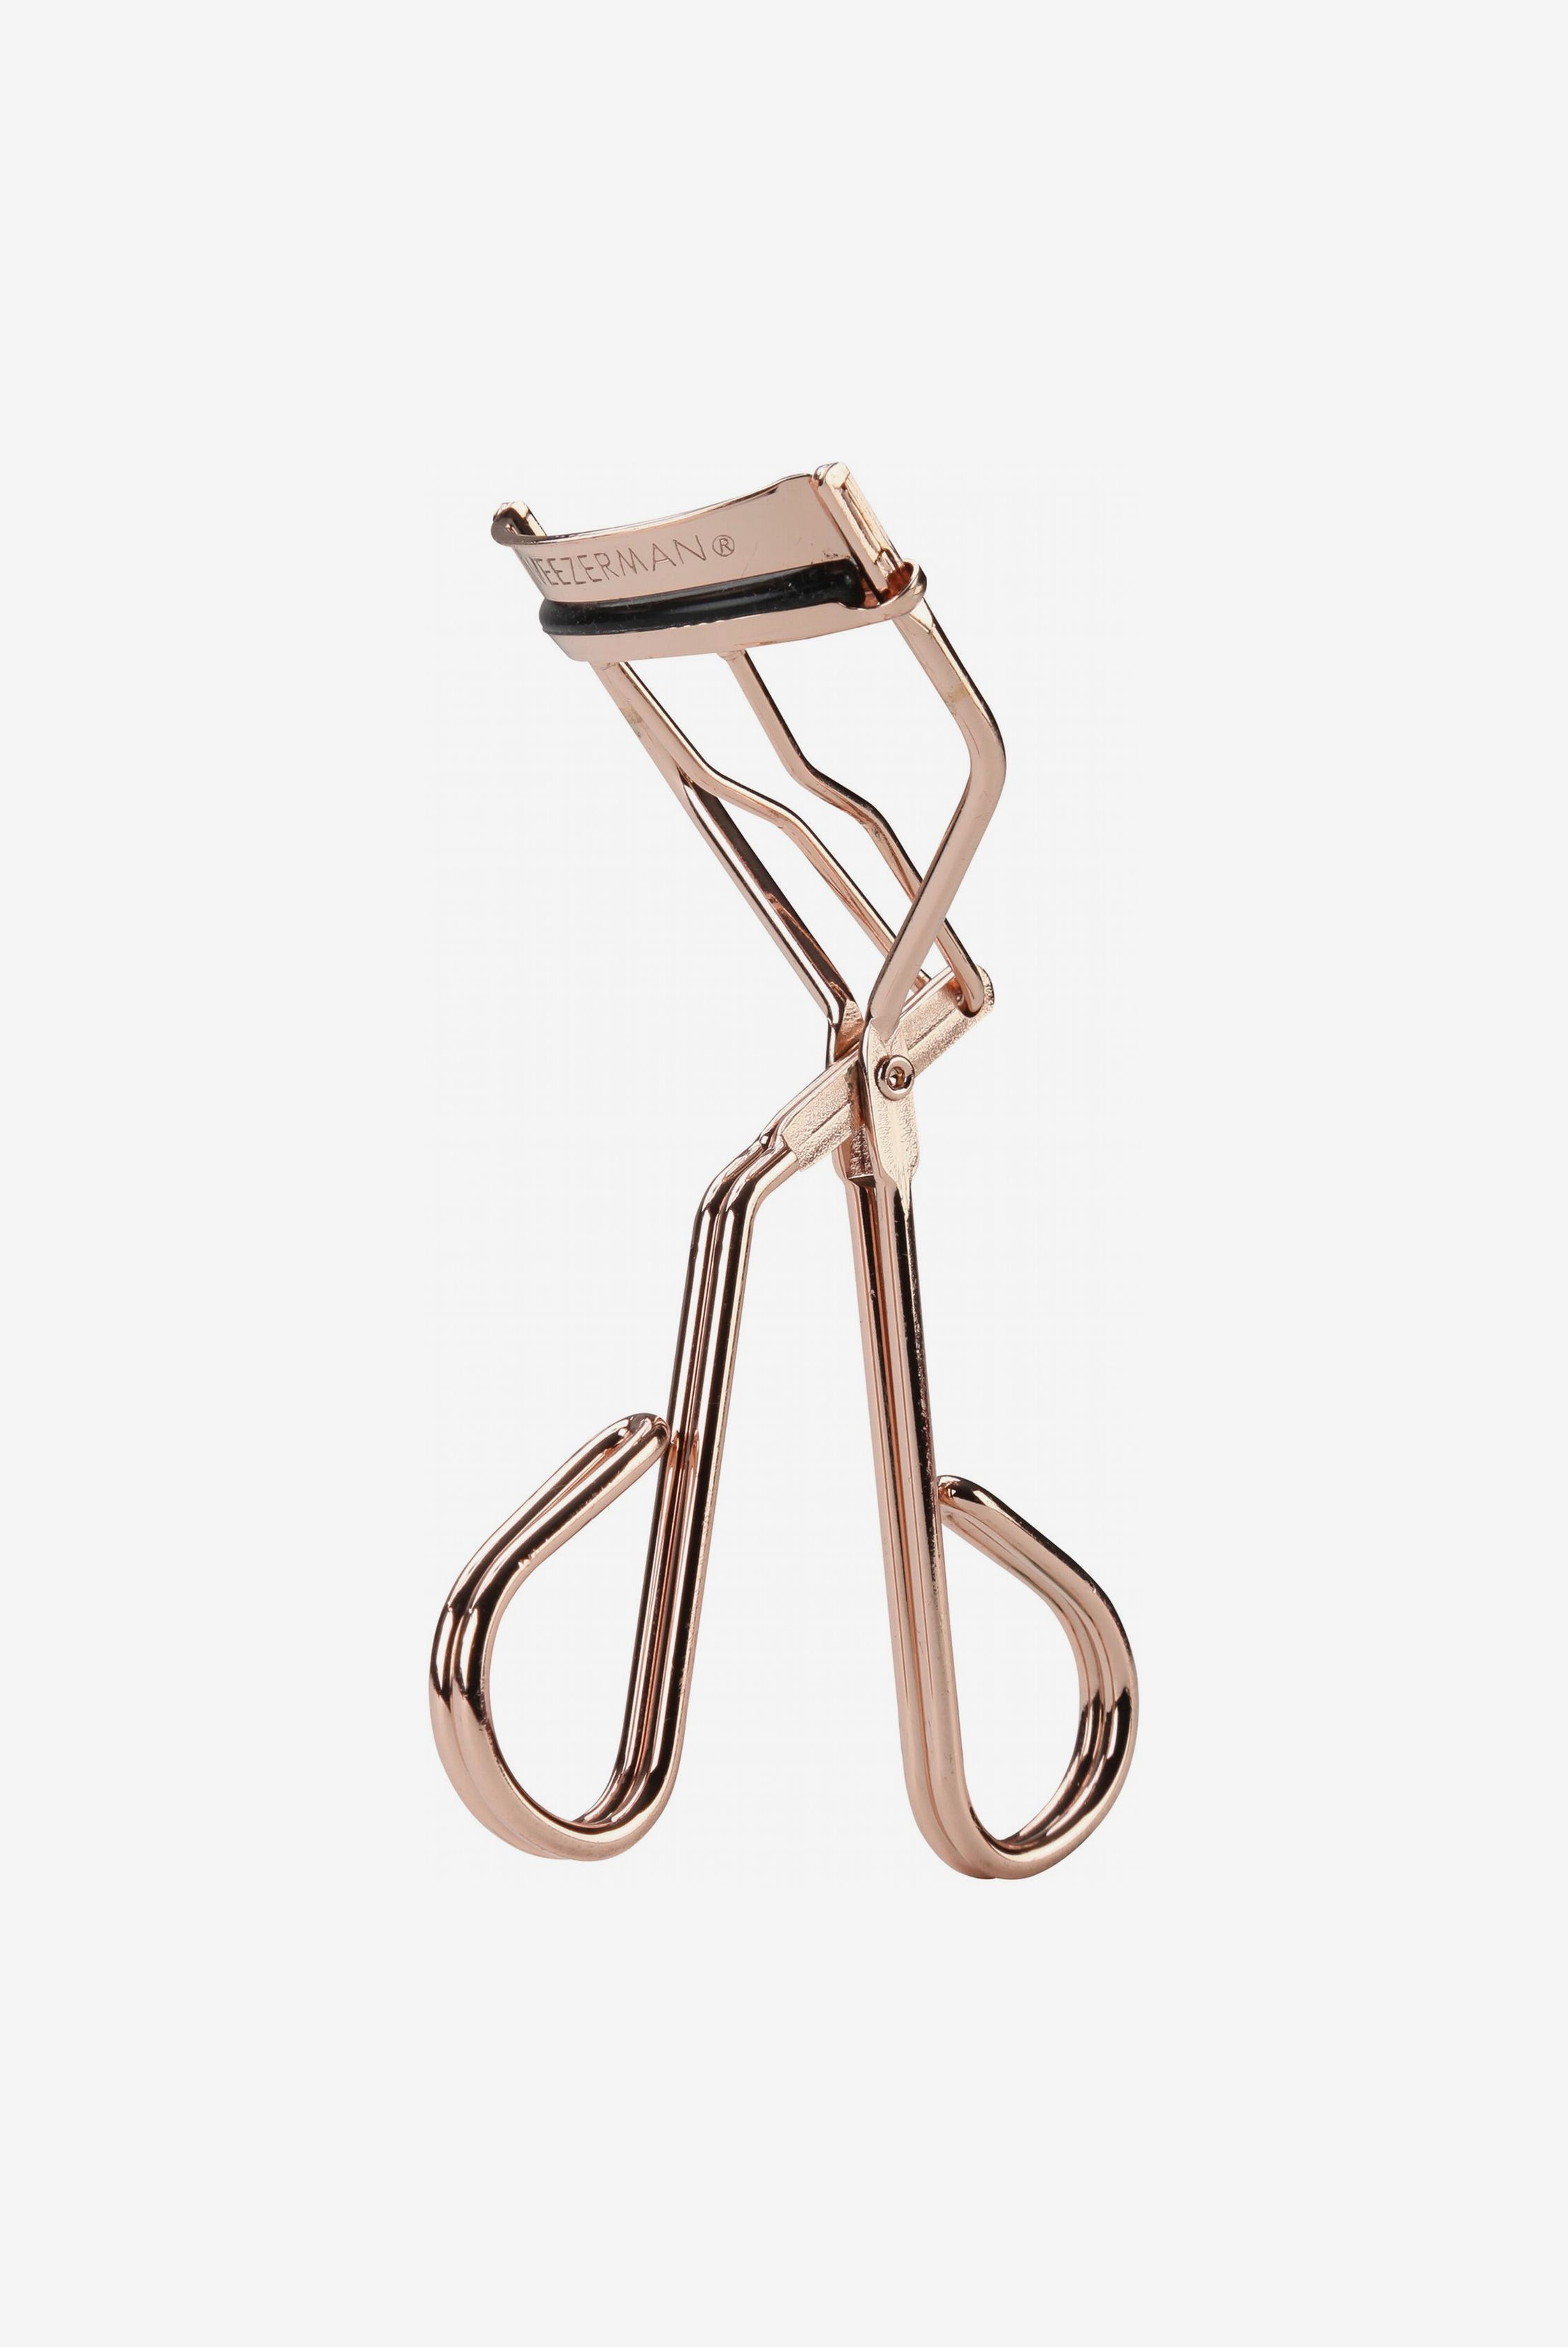 15 Best Eyelash Curlers for Swoopy, Lifted Lashes 2022